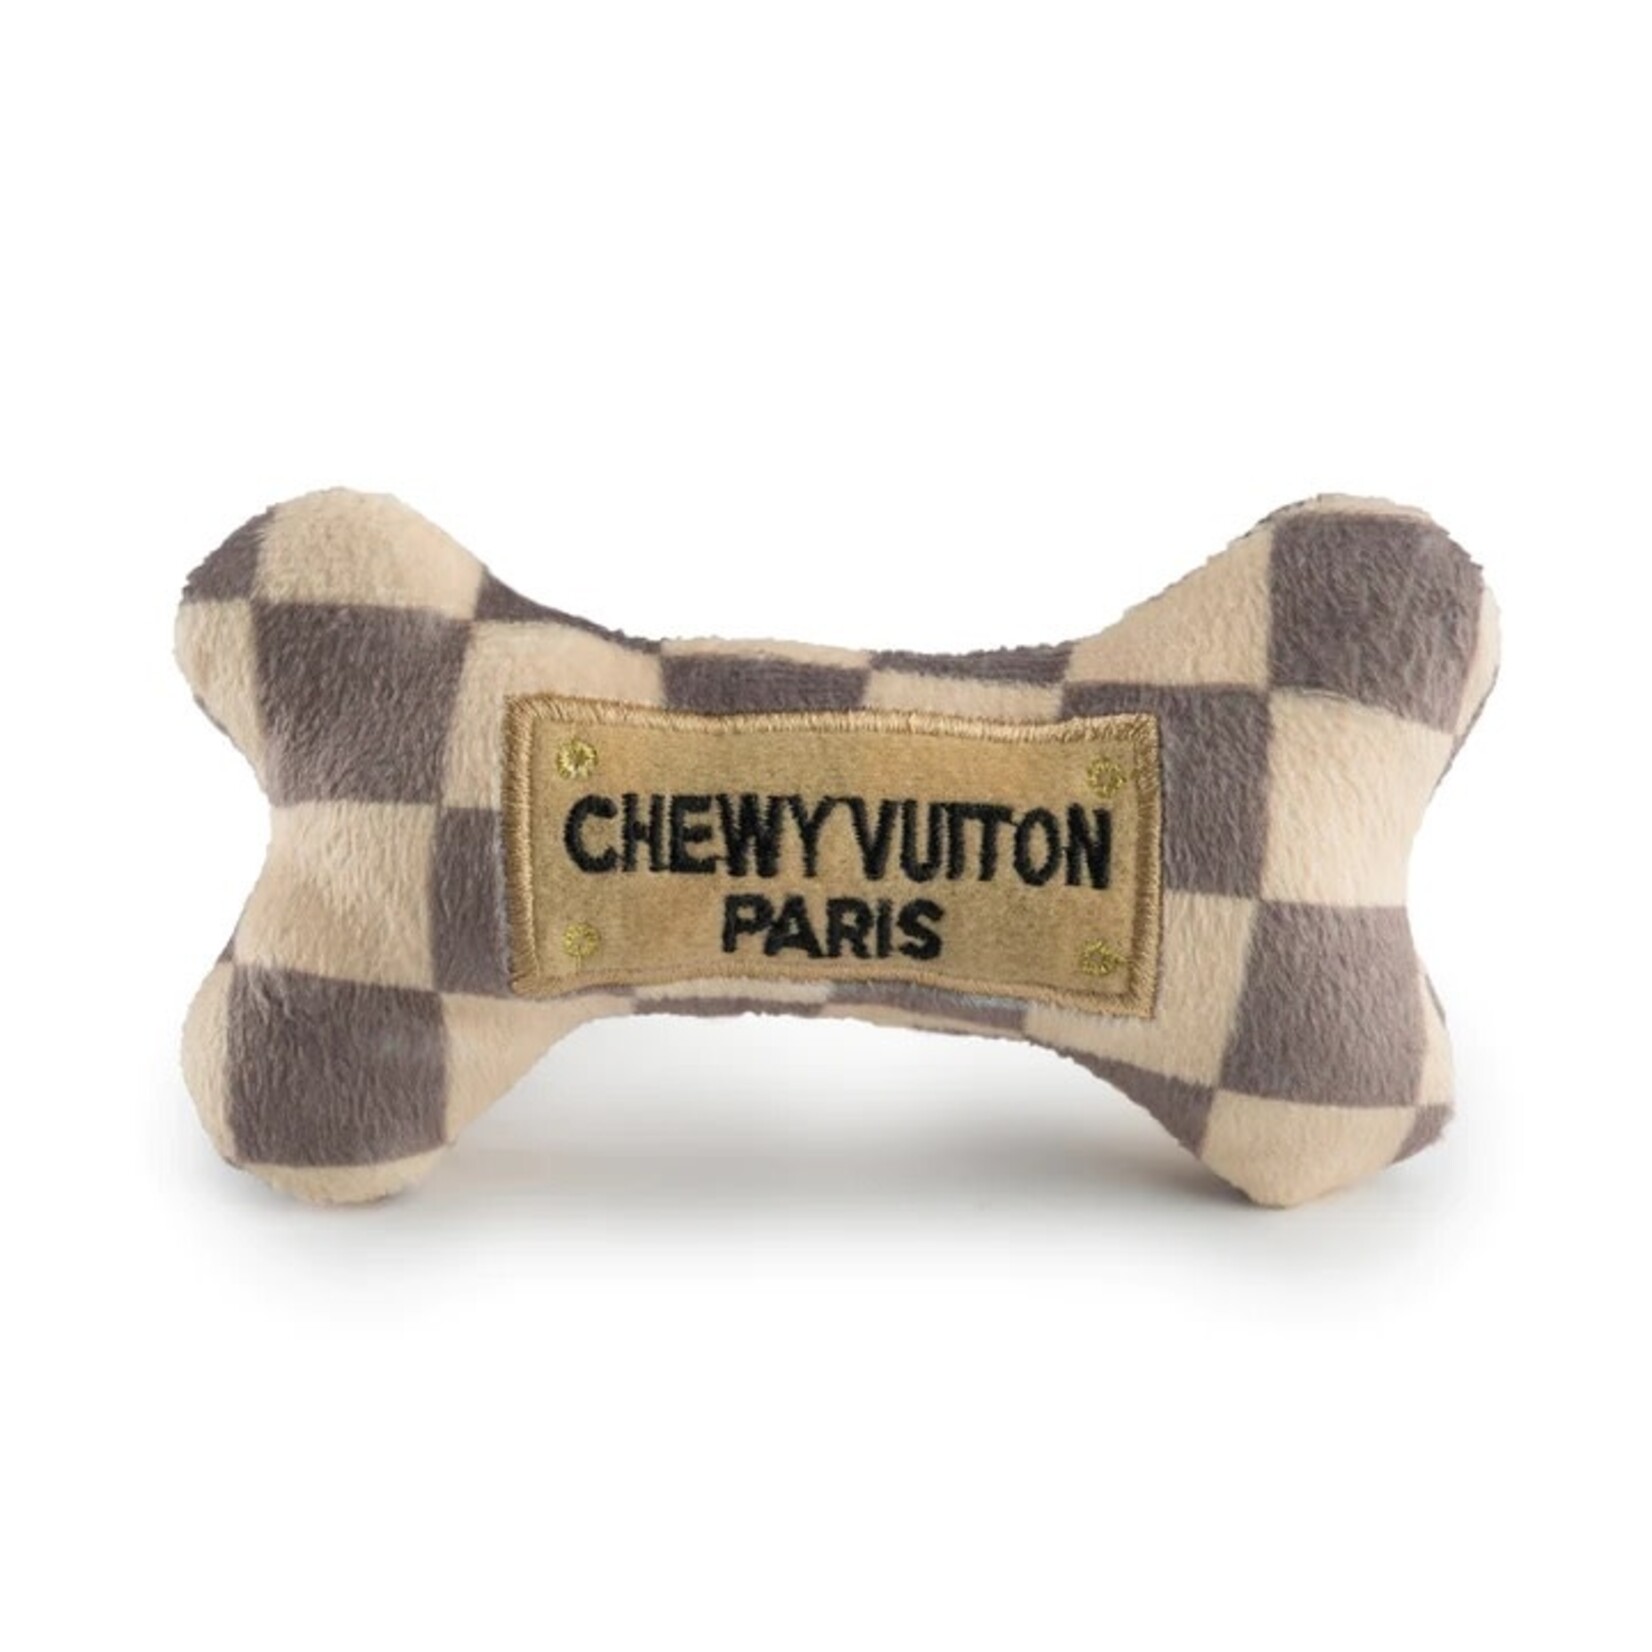 Haute Diggity Dog Checker Chewy Vuiton Bones Squeaker Dog Toy | Large